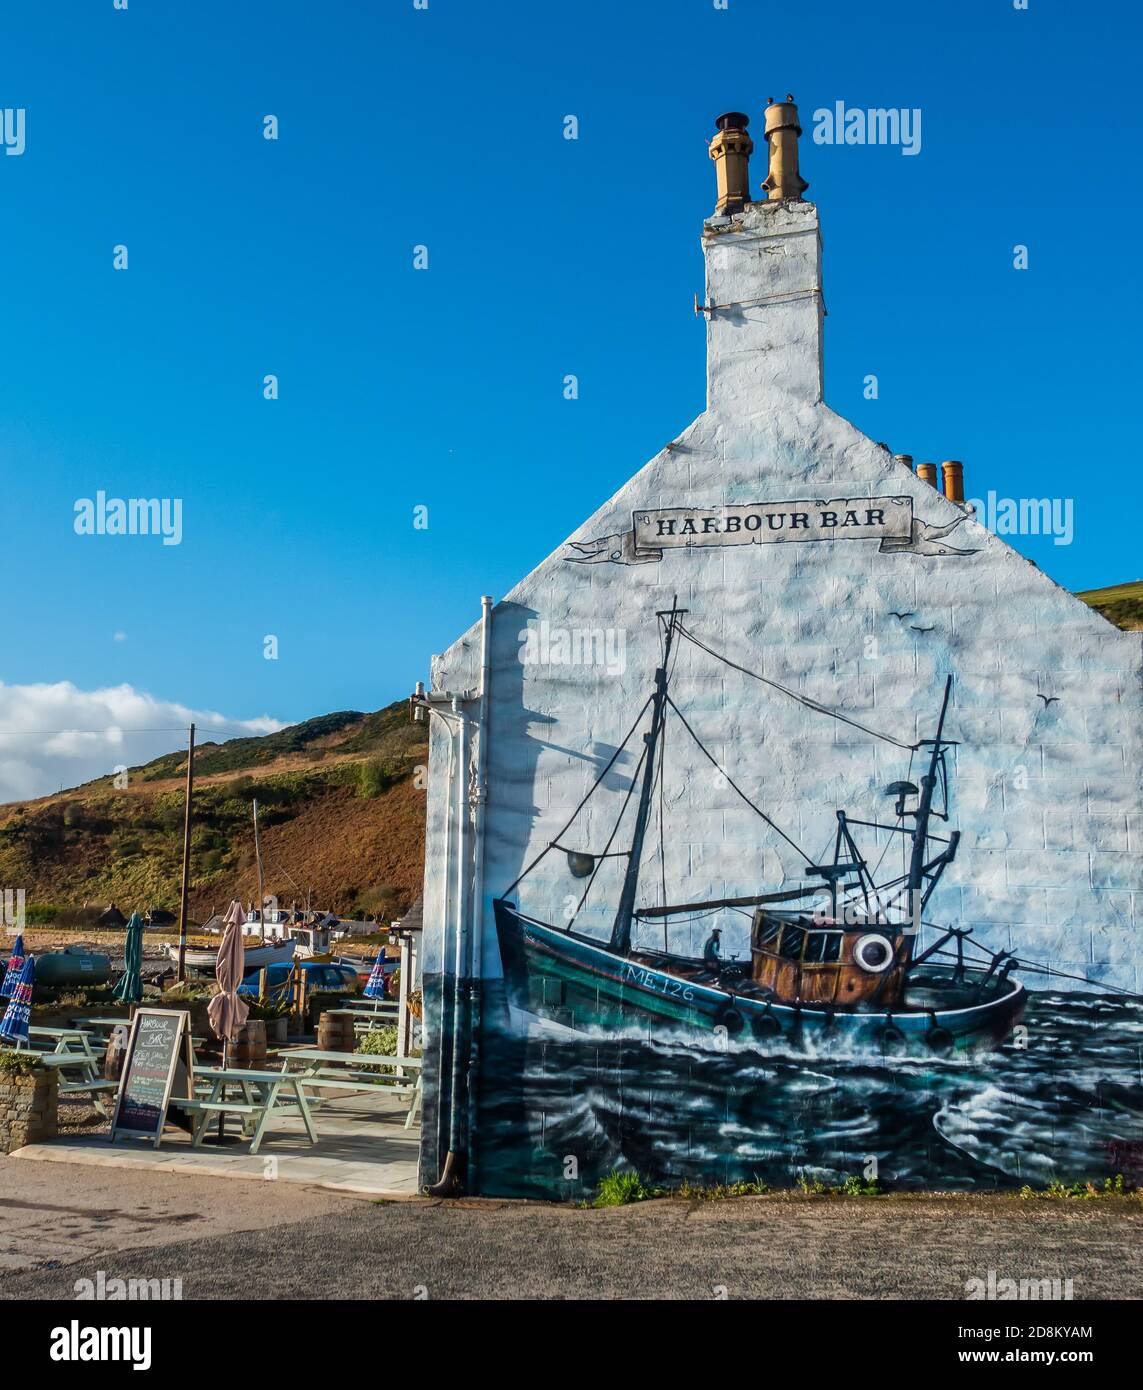 The Harbour Bar pub in the picturesque fishing village of Gourdon in Aberdeenshire, Scotland, UK Stock Photo